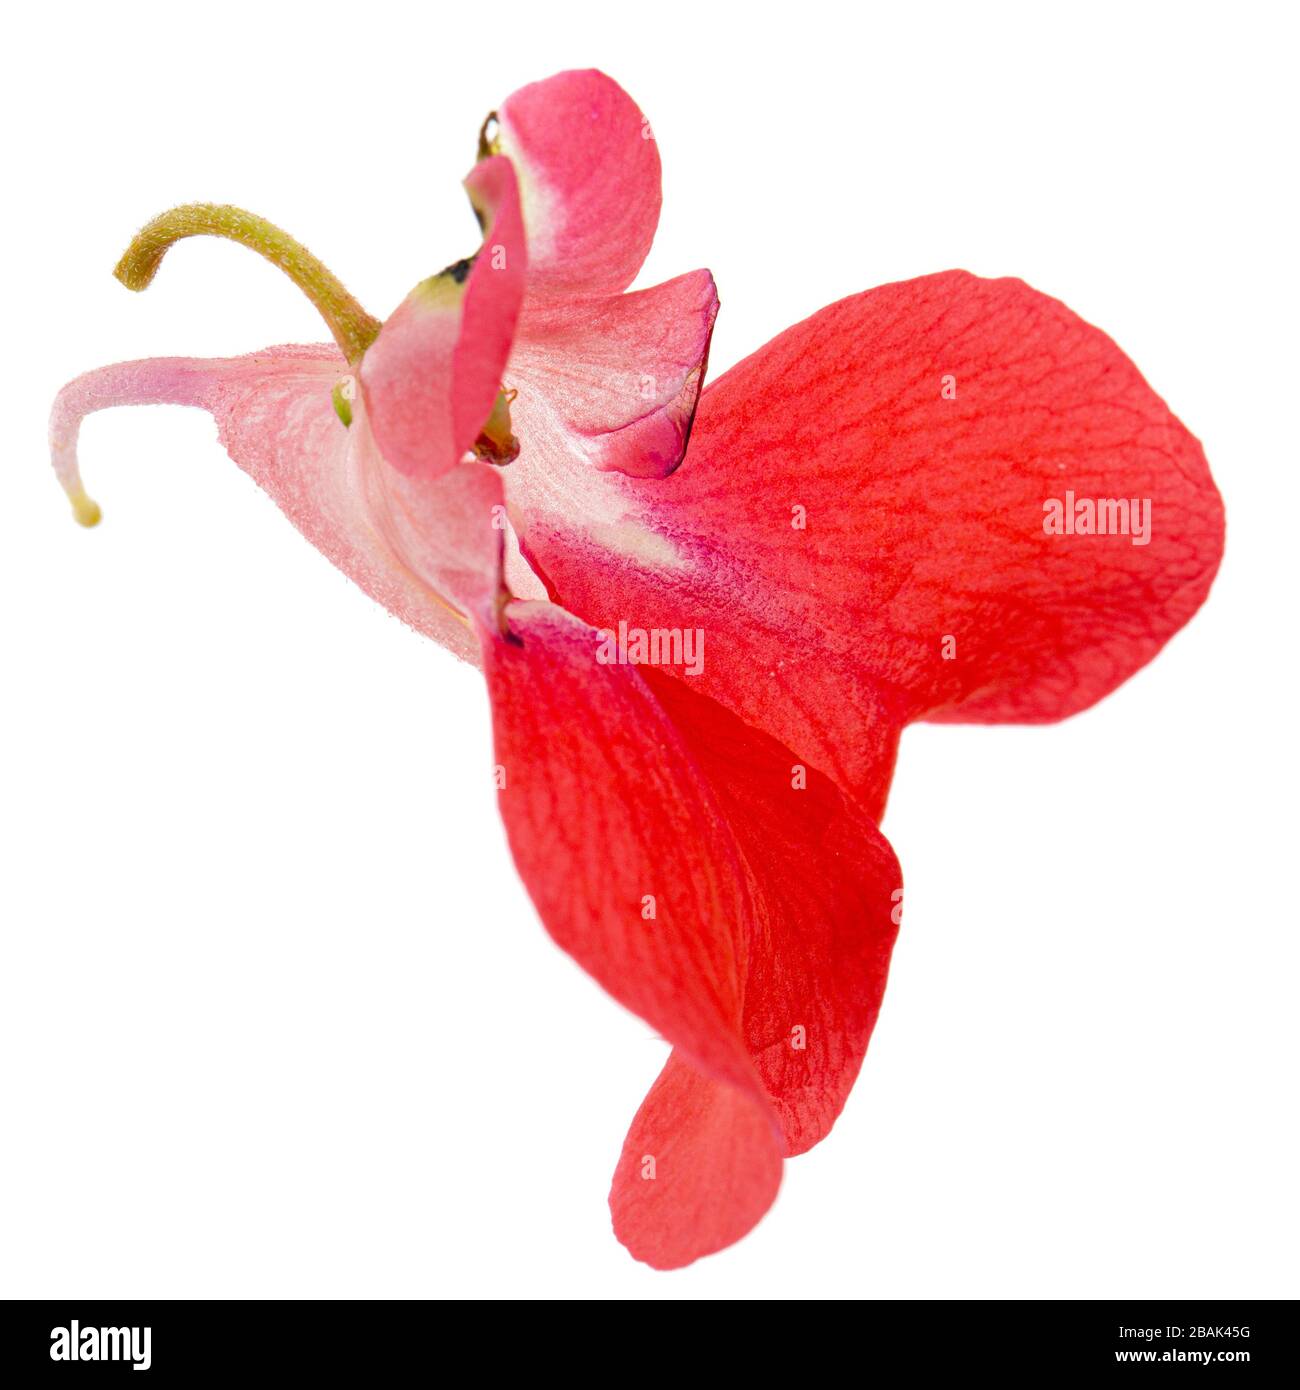 Scarlet flower of Impatiens balsamina, garden balsam jewelweed touch-me-not plant, isolated on white background Stock Photo